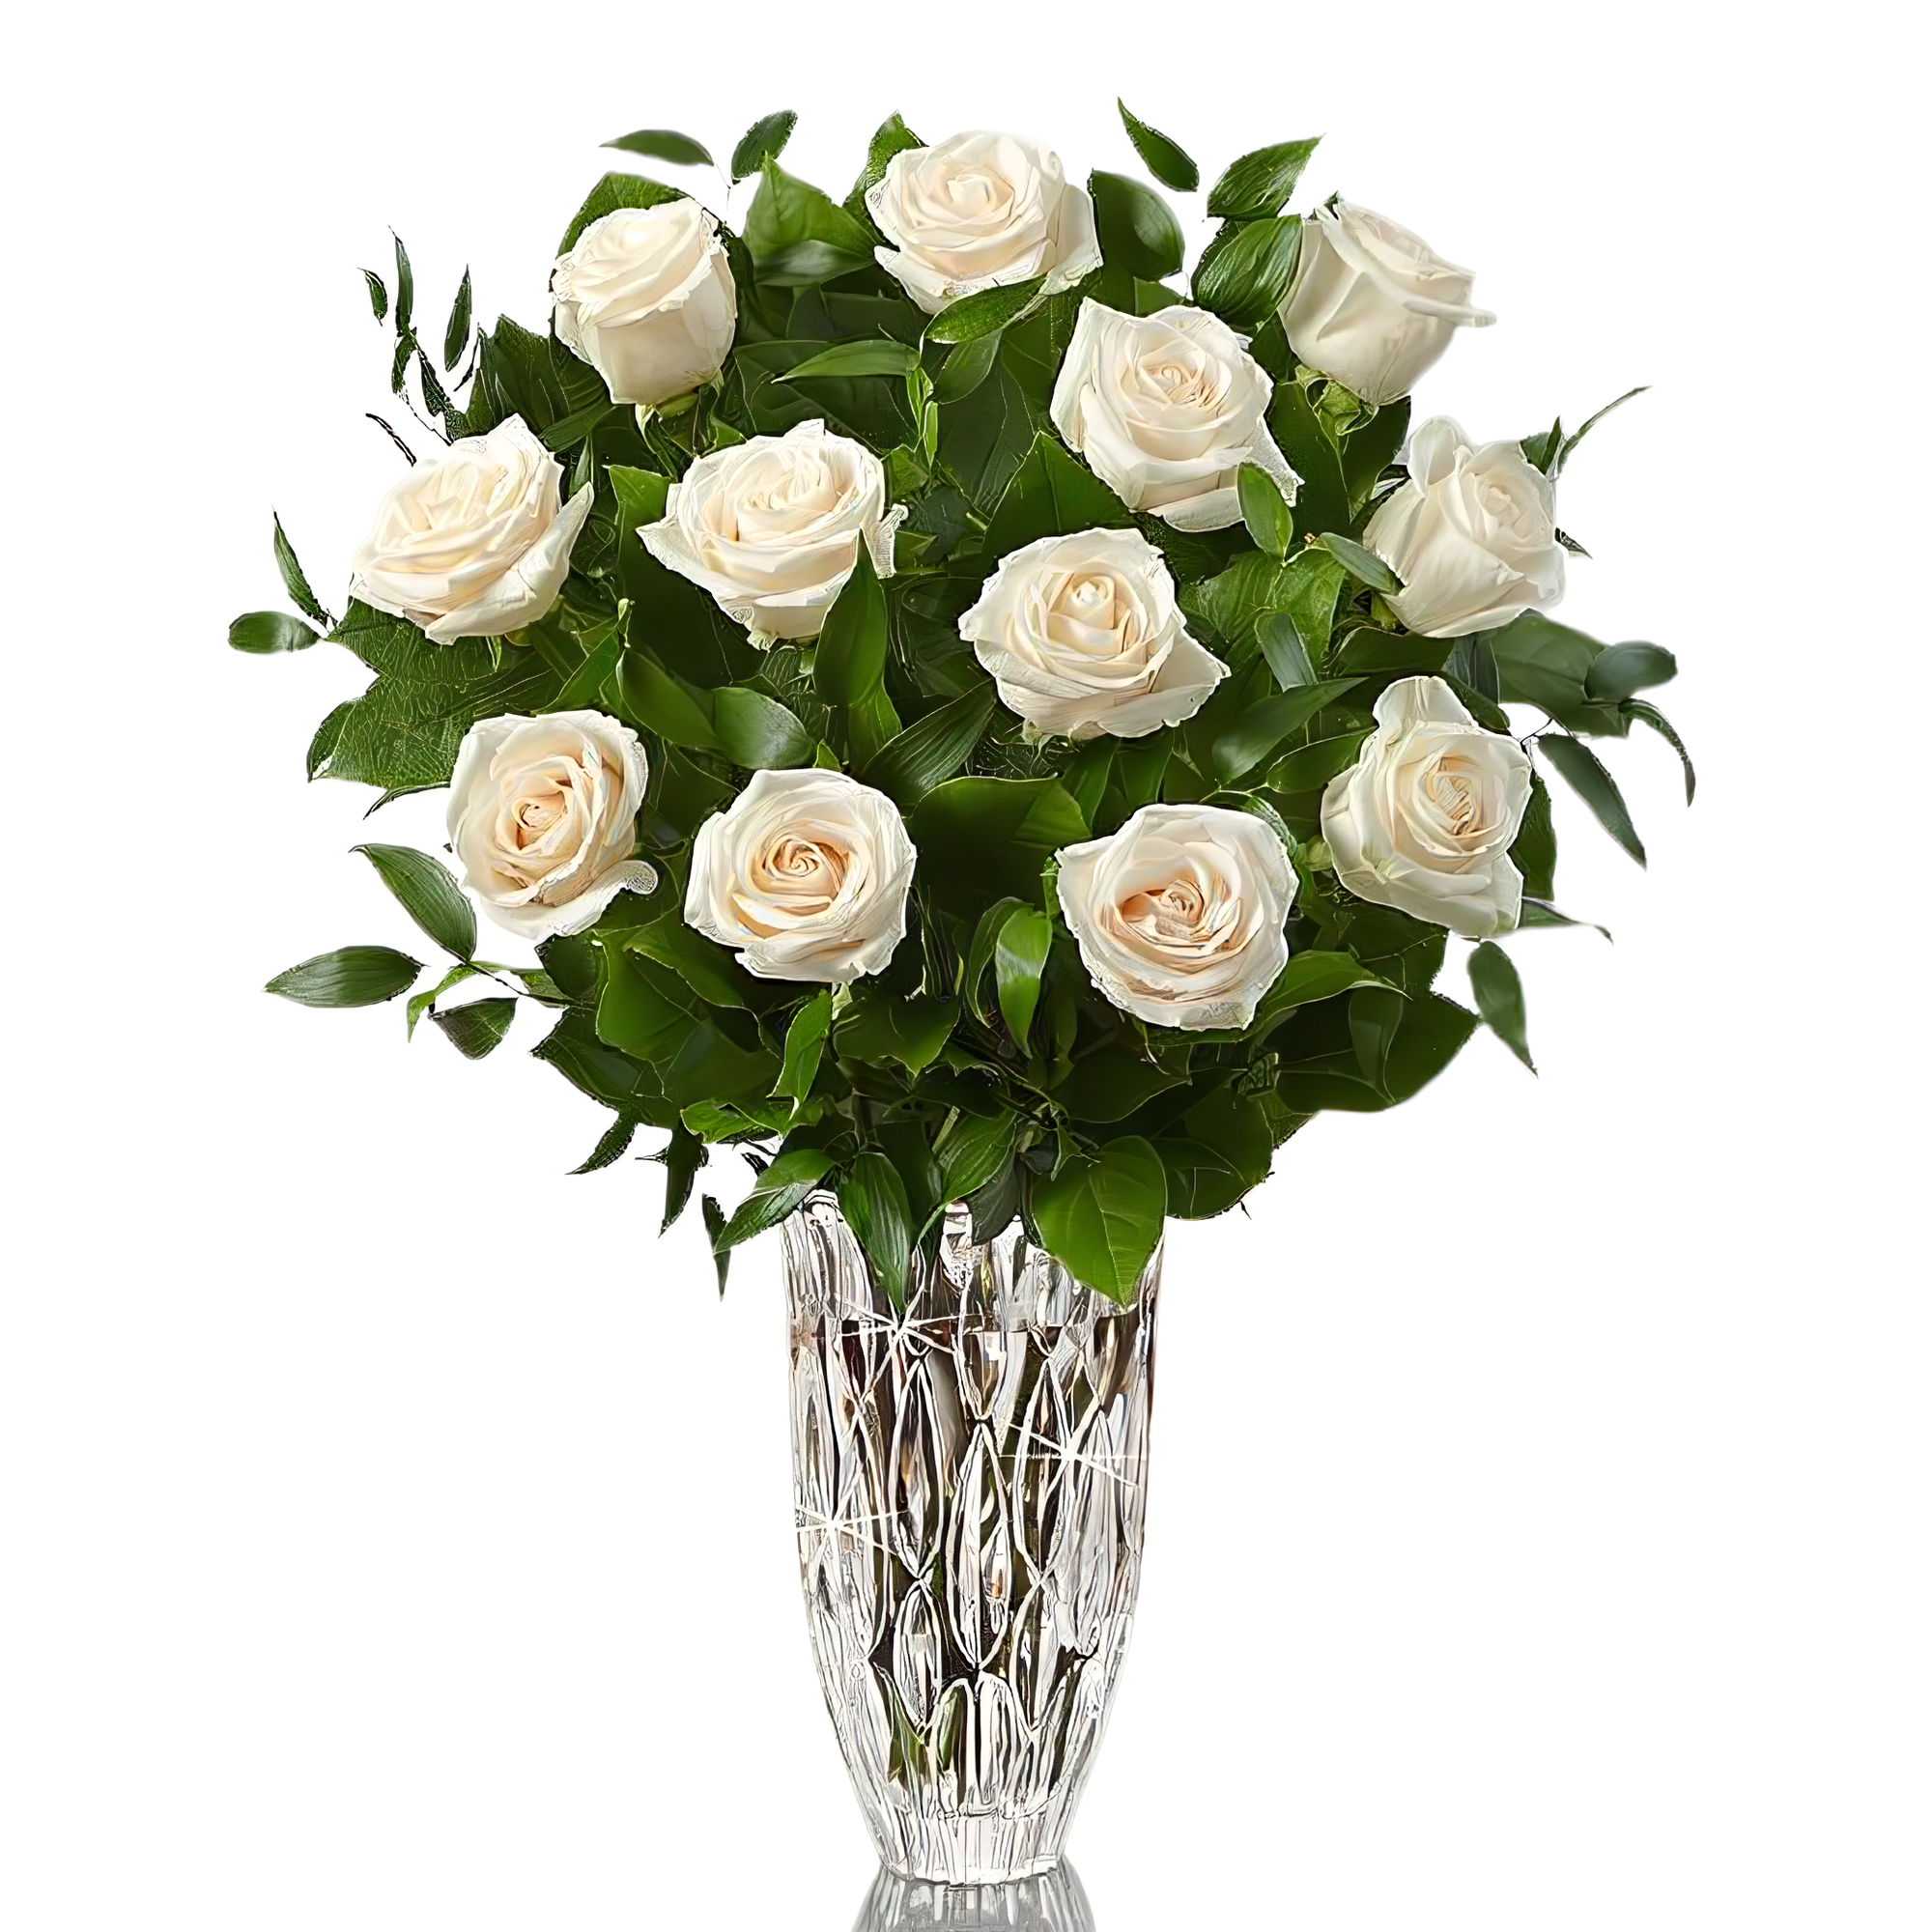 Marquis by Waterford White Roses for Sympathy - Funeral > Vase Arrangements